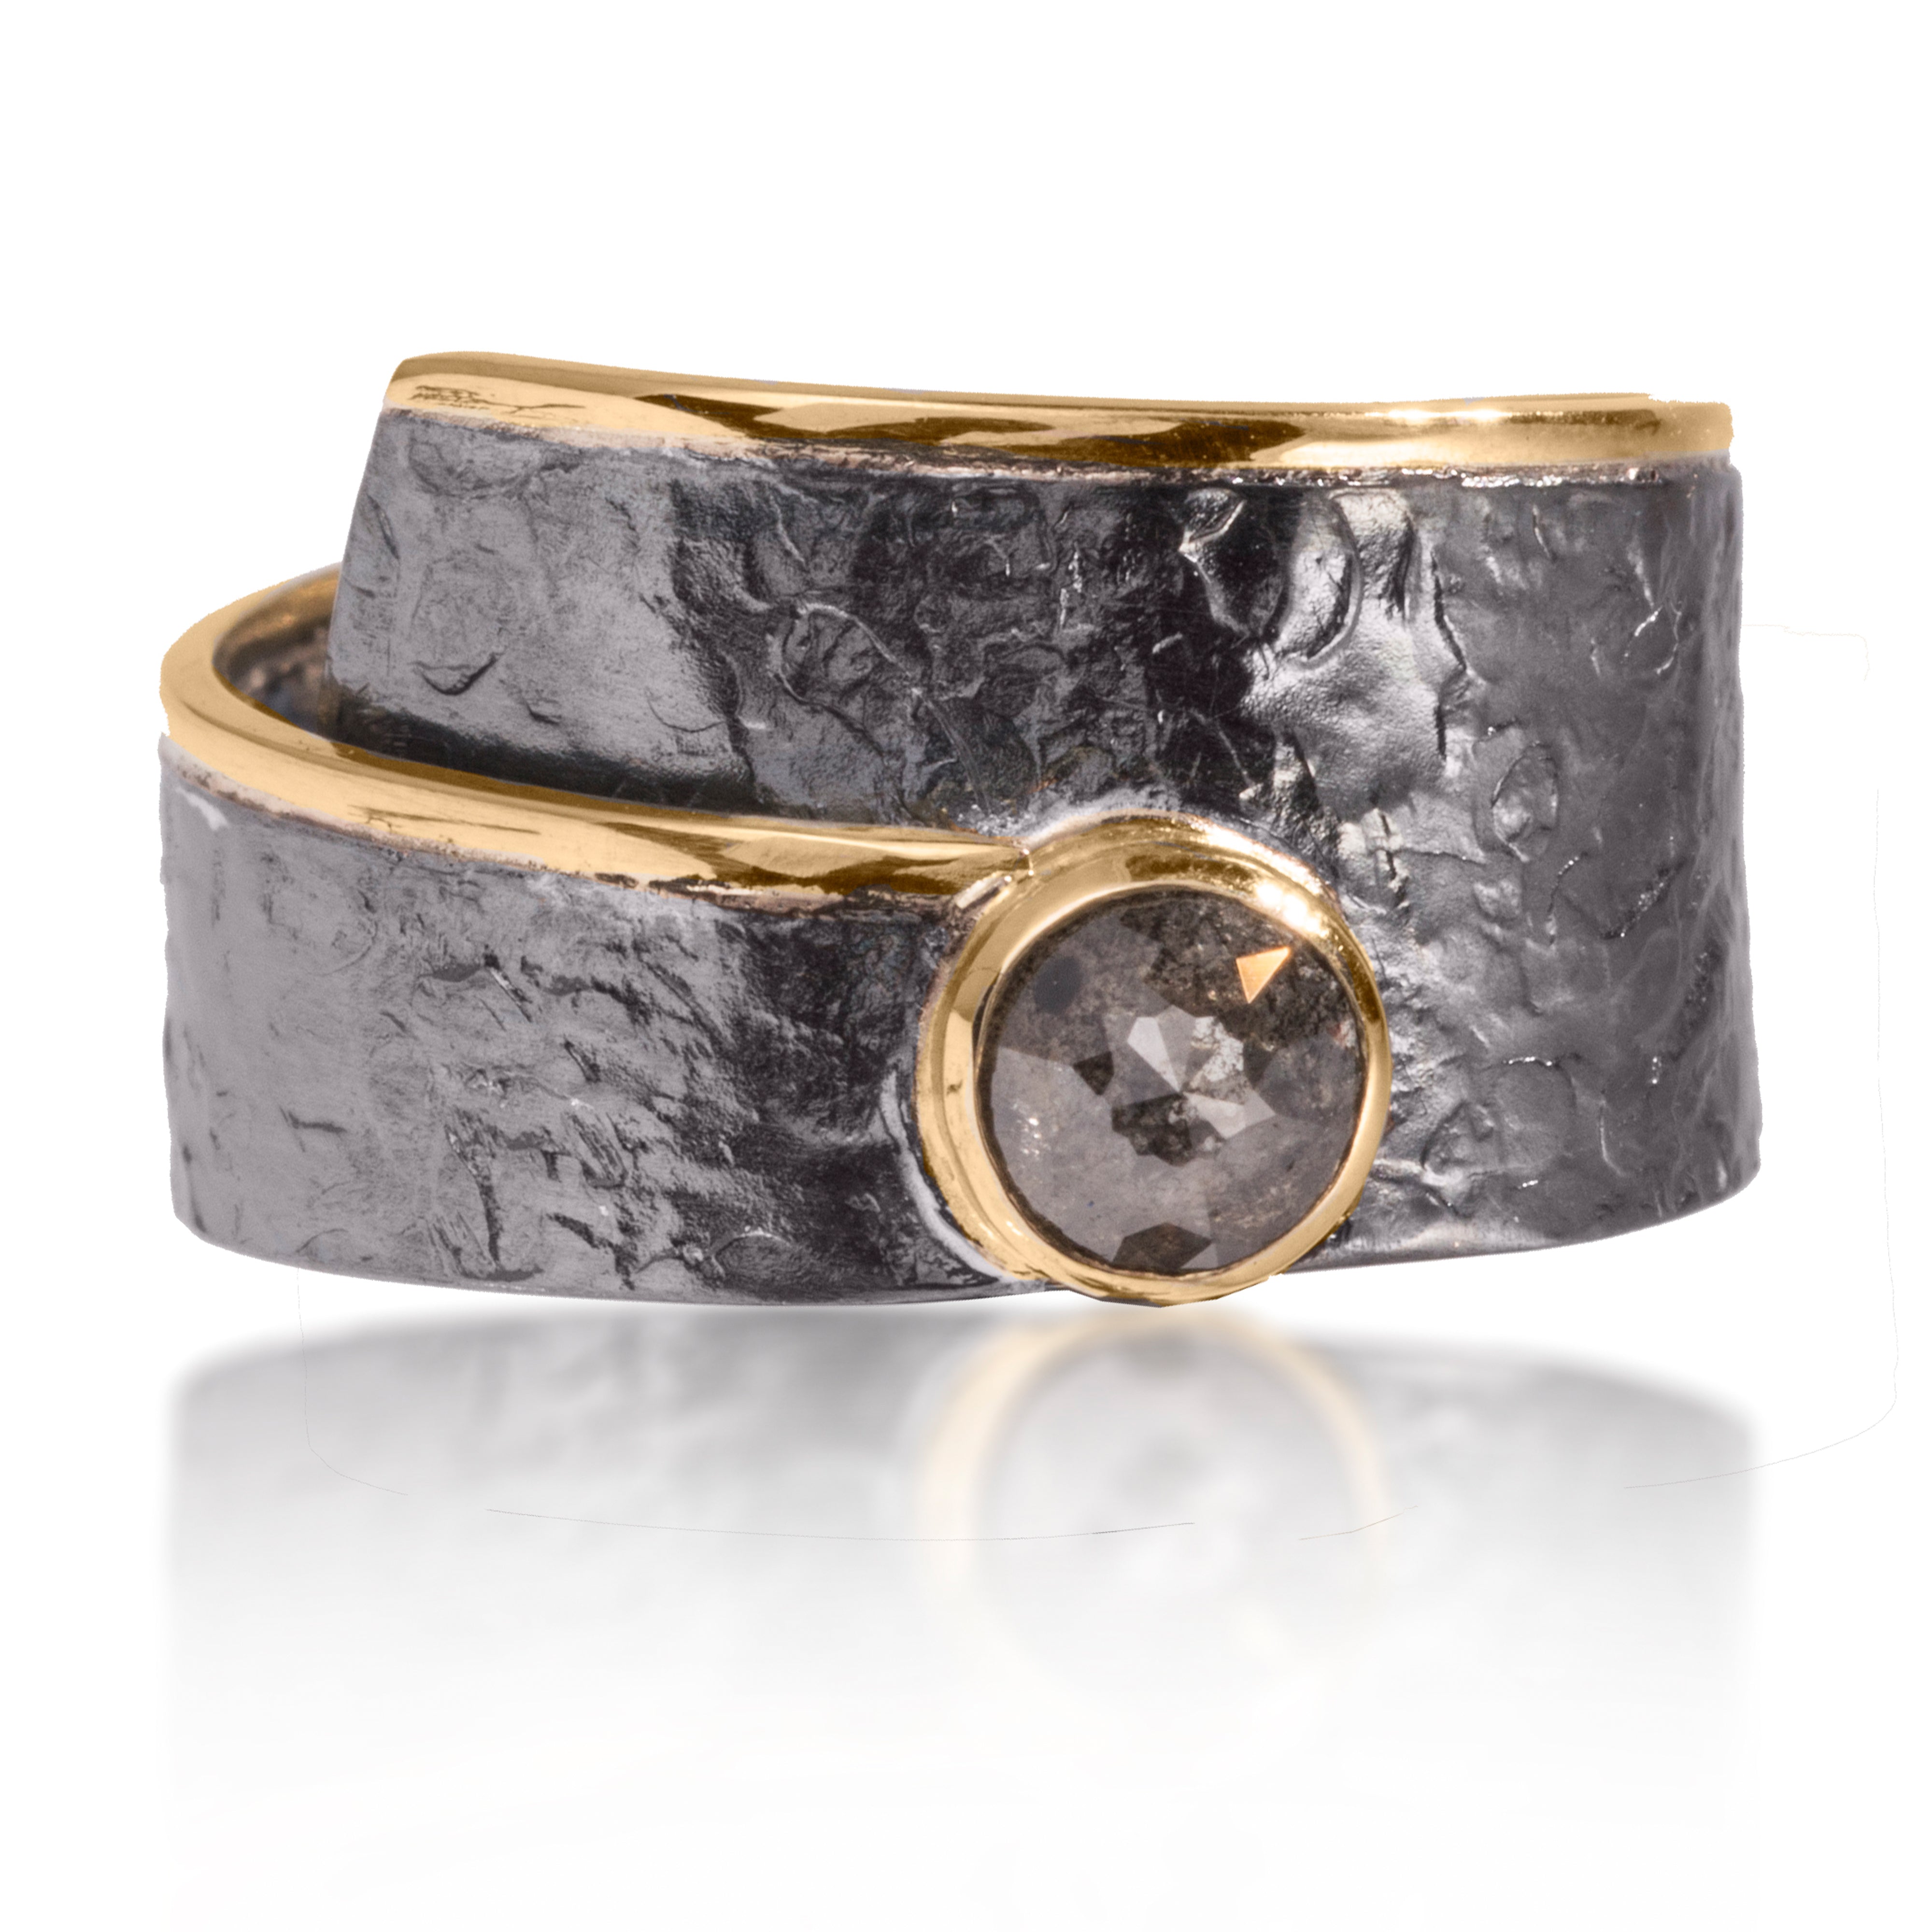 This simple and elegant Cyclone Ring is made of 18k gold and oxidized silver with a bezel set center rose cut, opaque diamond. Hand fabricated, hammer textured. Available in various widths, colors and cuts. 0.28- 0.33 tcw.